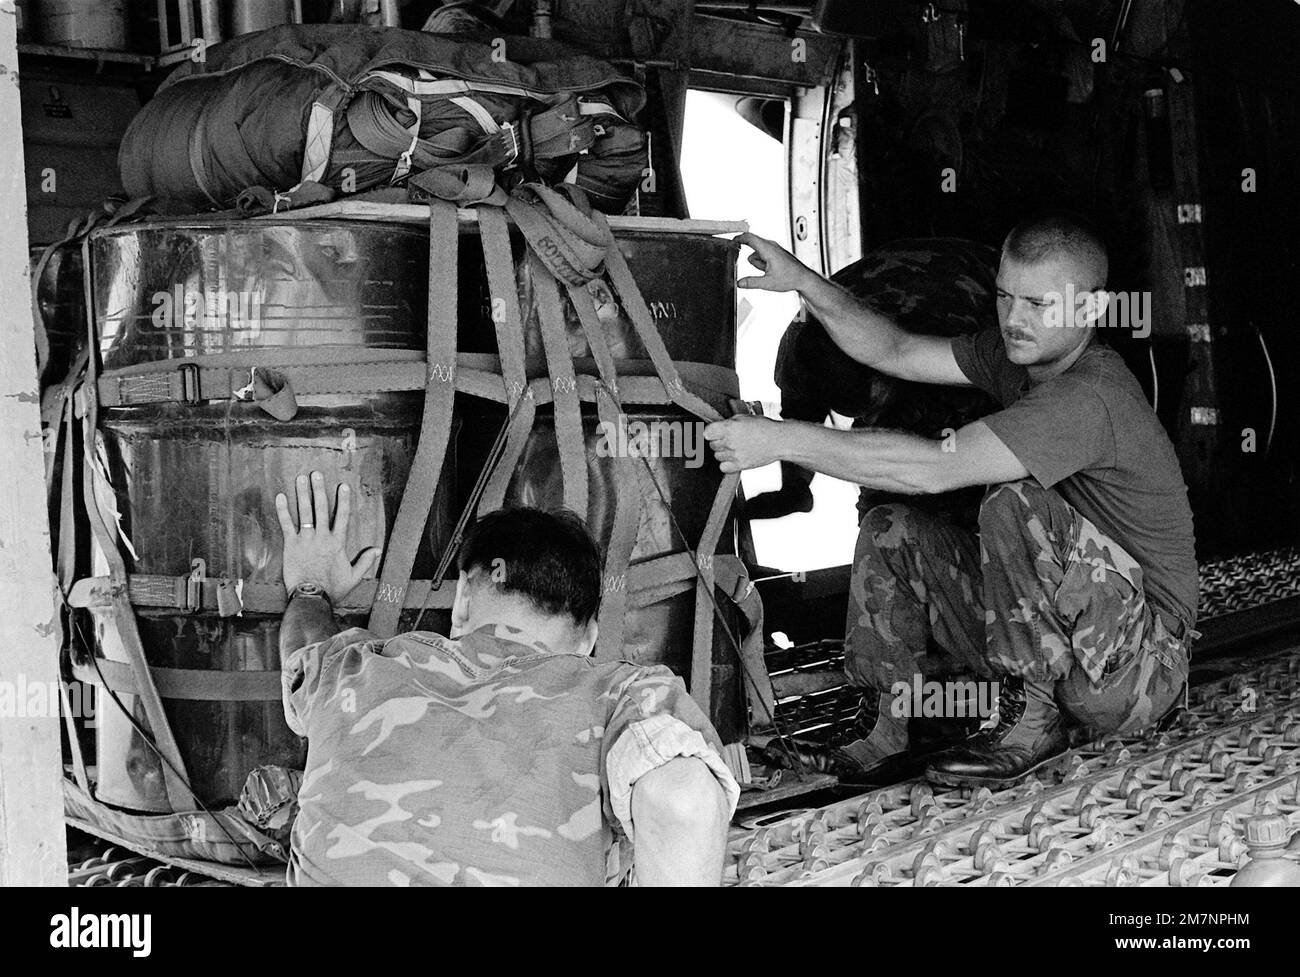 SGT Aguus R. Keydeniers gives SGT Robert C. Bunce a helping hand at loading a pallet of 50-gallon drums onto a C-130 Hercules aircraft. Base: Marine Corps Air Station, Futema State: Okinawa Country: Japan (JPN) Stock Photo